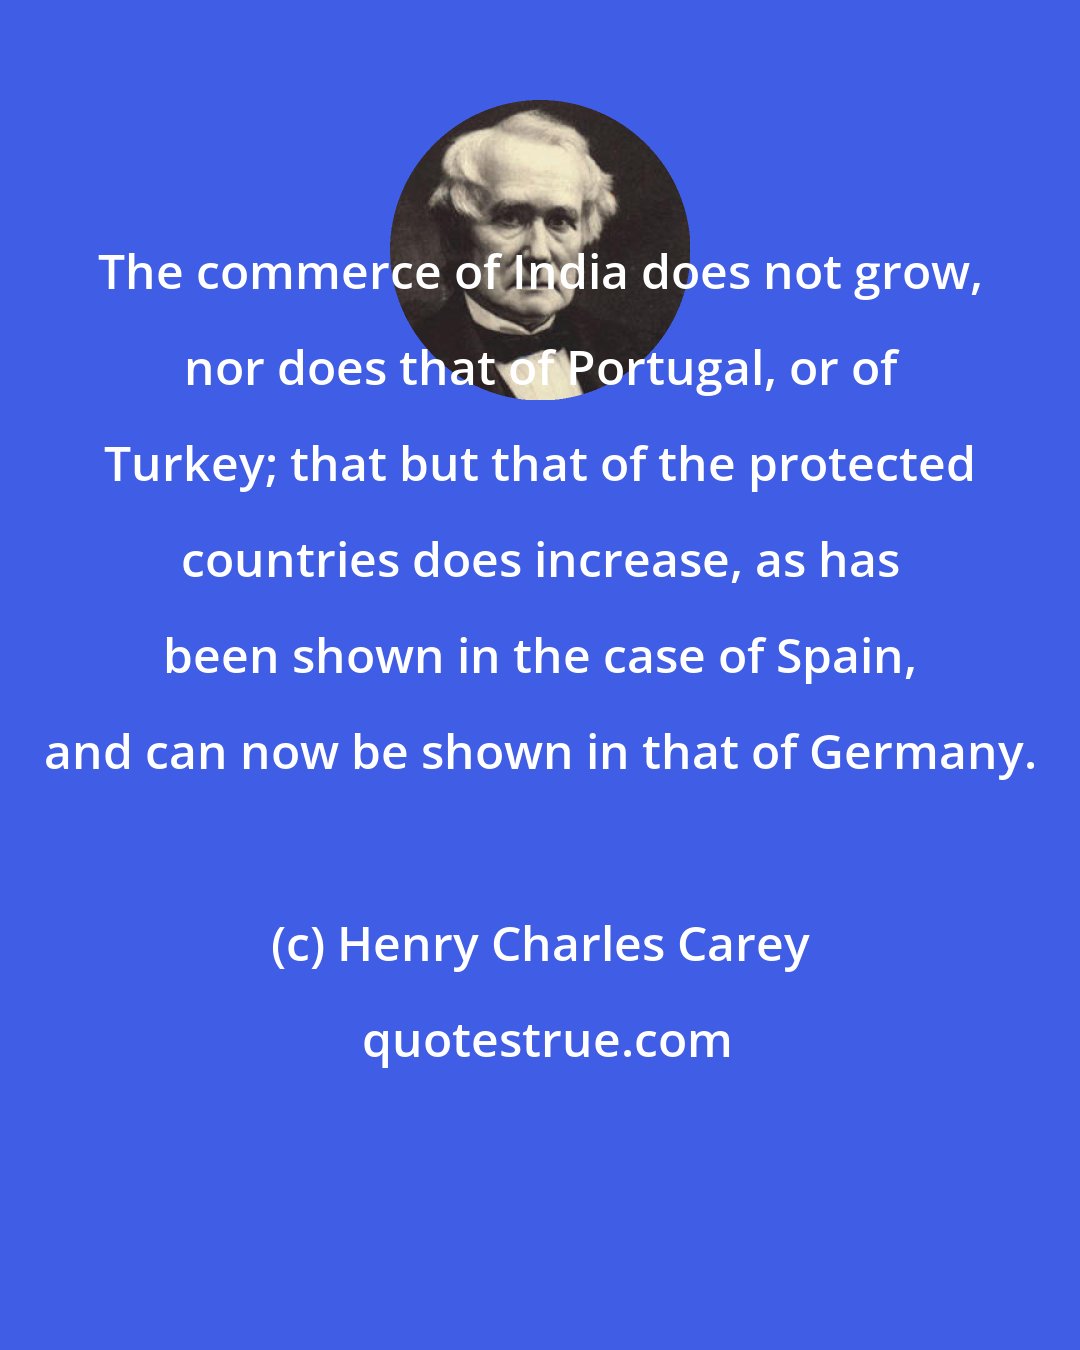 Henry Charles Carey: The commerce of India does not grow, nor does that of Portugal, or of Turkey; that but that of the protected countries does increase, as has been shown in the case of Spain, and can now be shown in that of Germany.